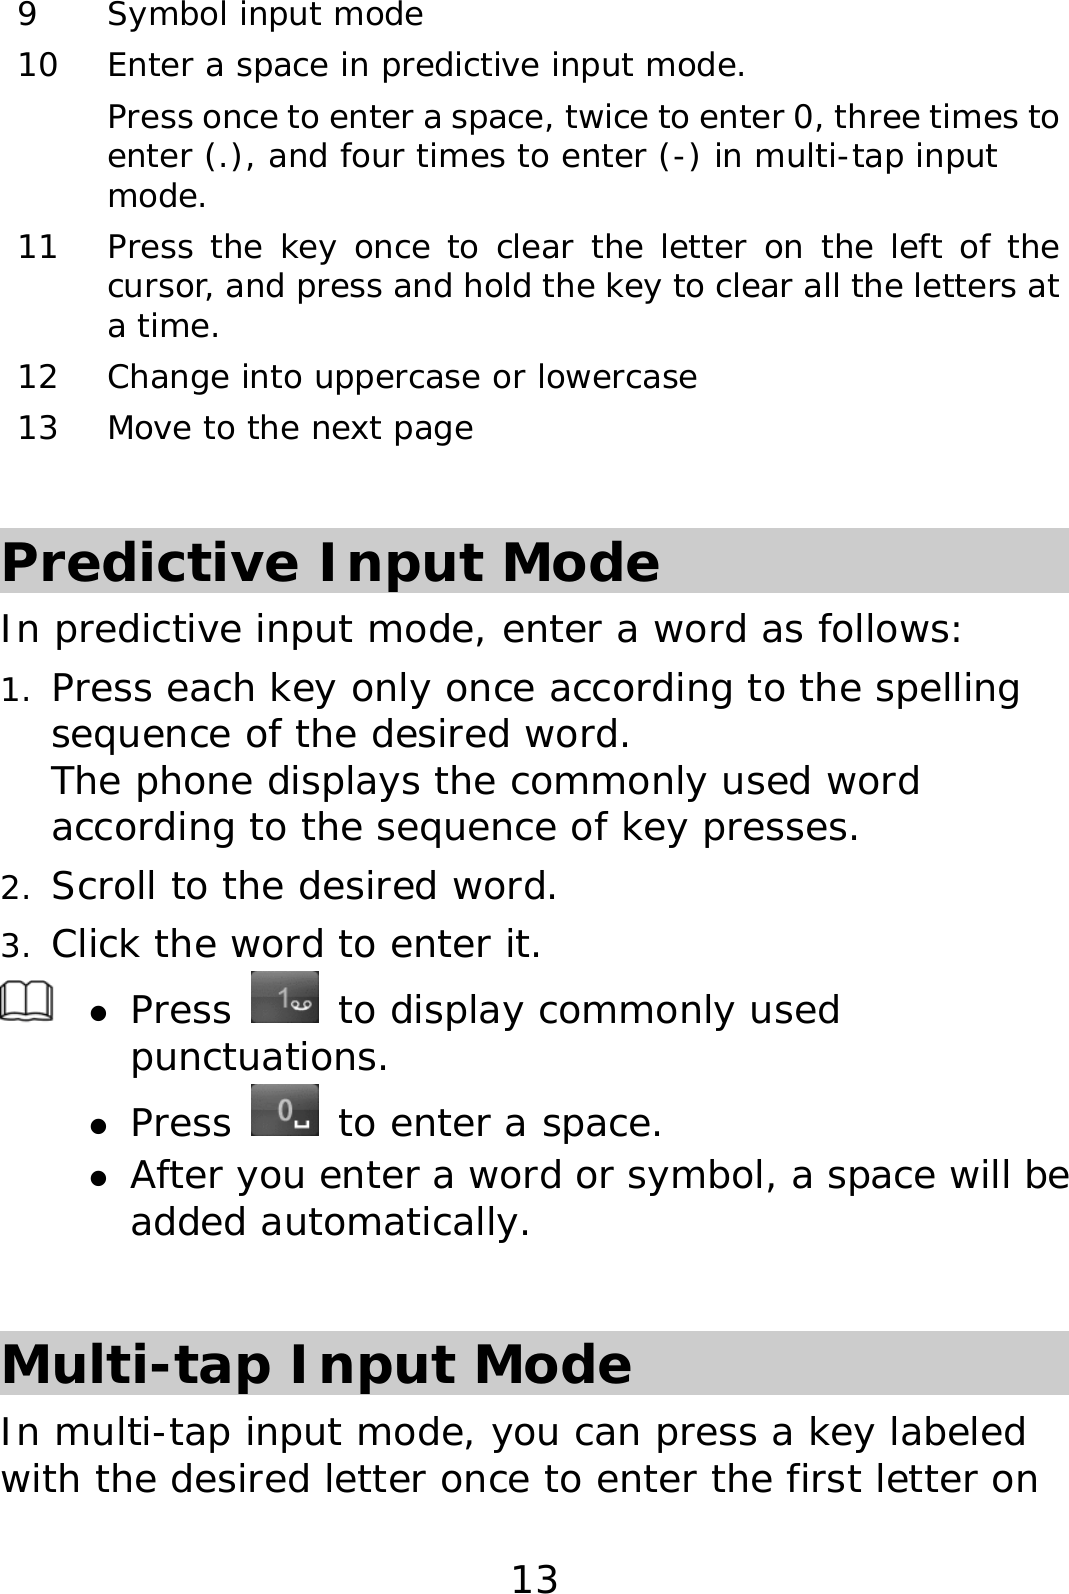 13 9 Symbol input mode 10  Enter a space in predictive input mode.  Press once to enter a space, twice to enter 0, three times to enter (.), and four times to enter (-) in multi-tap input mode. 11  Press the key once to clear the letter on the left of the cursor, and press and hold the key to clear all the letters at a time.  12 Change into uppercase or lowercase 13  Move to the next page  Predictive Input Mode In predictive input mode, enter a word as follows: 1. Press each key only once according to the spelling sequence of the desired word.  The phone displays the commonly used word according to the sequence of key presses. 2. Scroll to the desired word.  3. Click the word to enter it.  z Press   to display commonly used punctuations. z Press   to enter a space. z After you enter a word or symbol, a space will be added automatically.  Multi-tap Input Mode In multi-tap input mode, you can press a key labeled with the desired letter once to enter the first letter on 